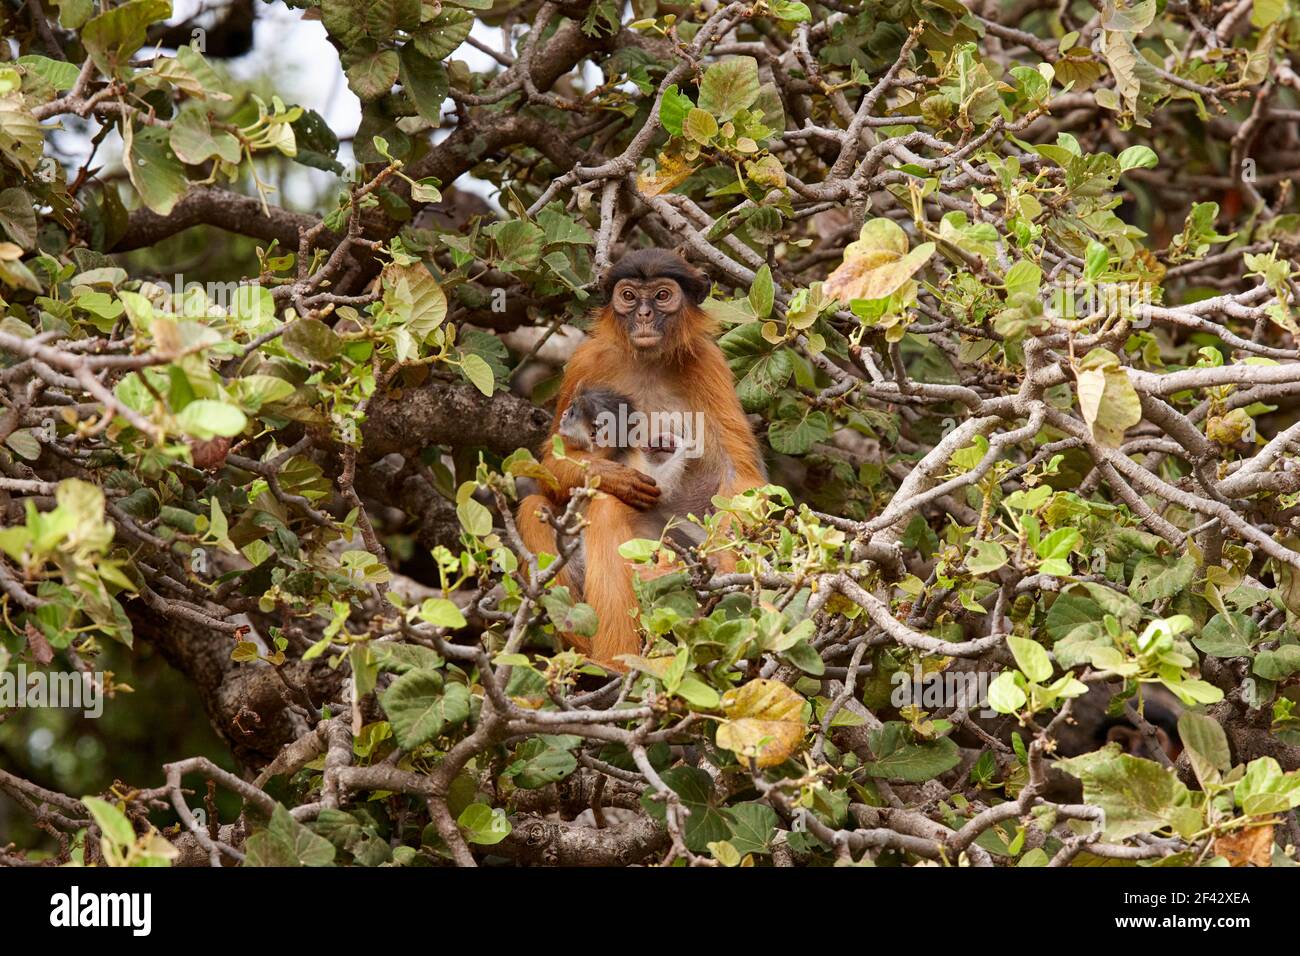 Western Red Colobus Piliocolobus Badius with a baby near Gambia River in Gambia, Africa Stock Photo